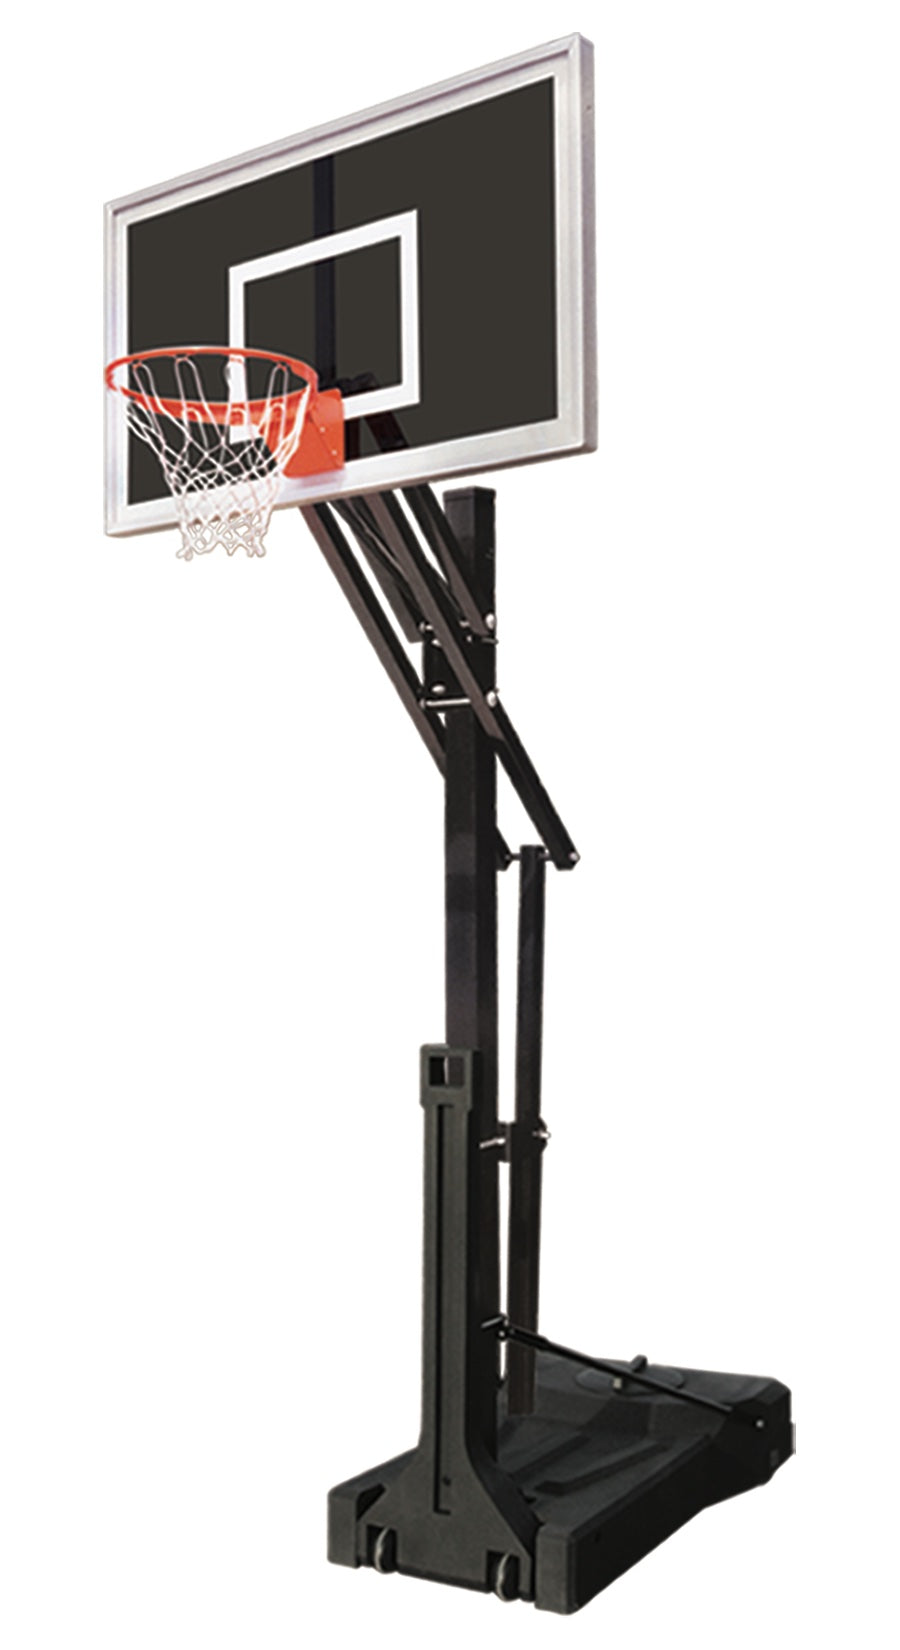 First Team OmniSlam Eclipse Portable Basketball Goal - 36"x60" Smoked Tempered Glass